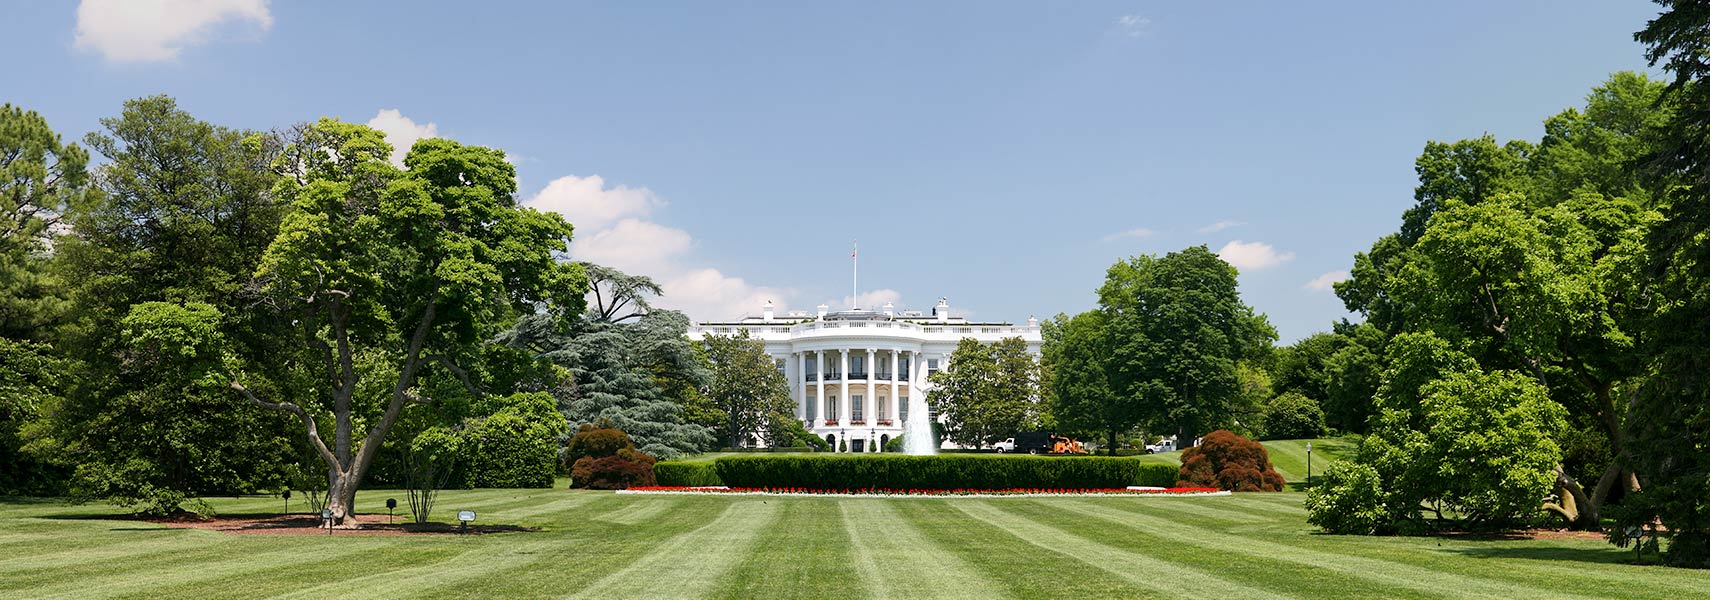 white house front and back view